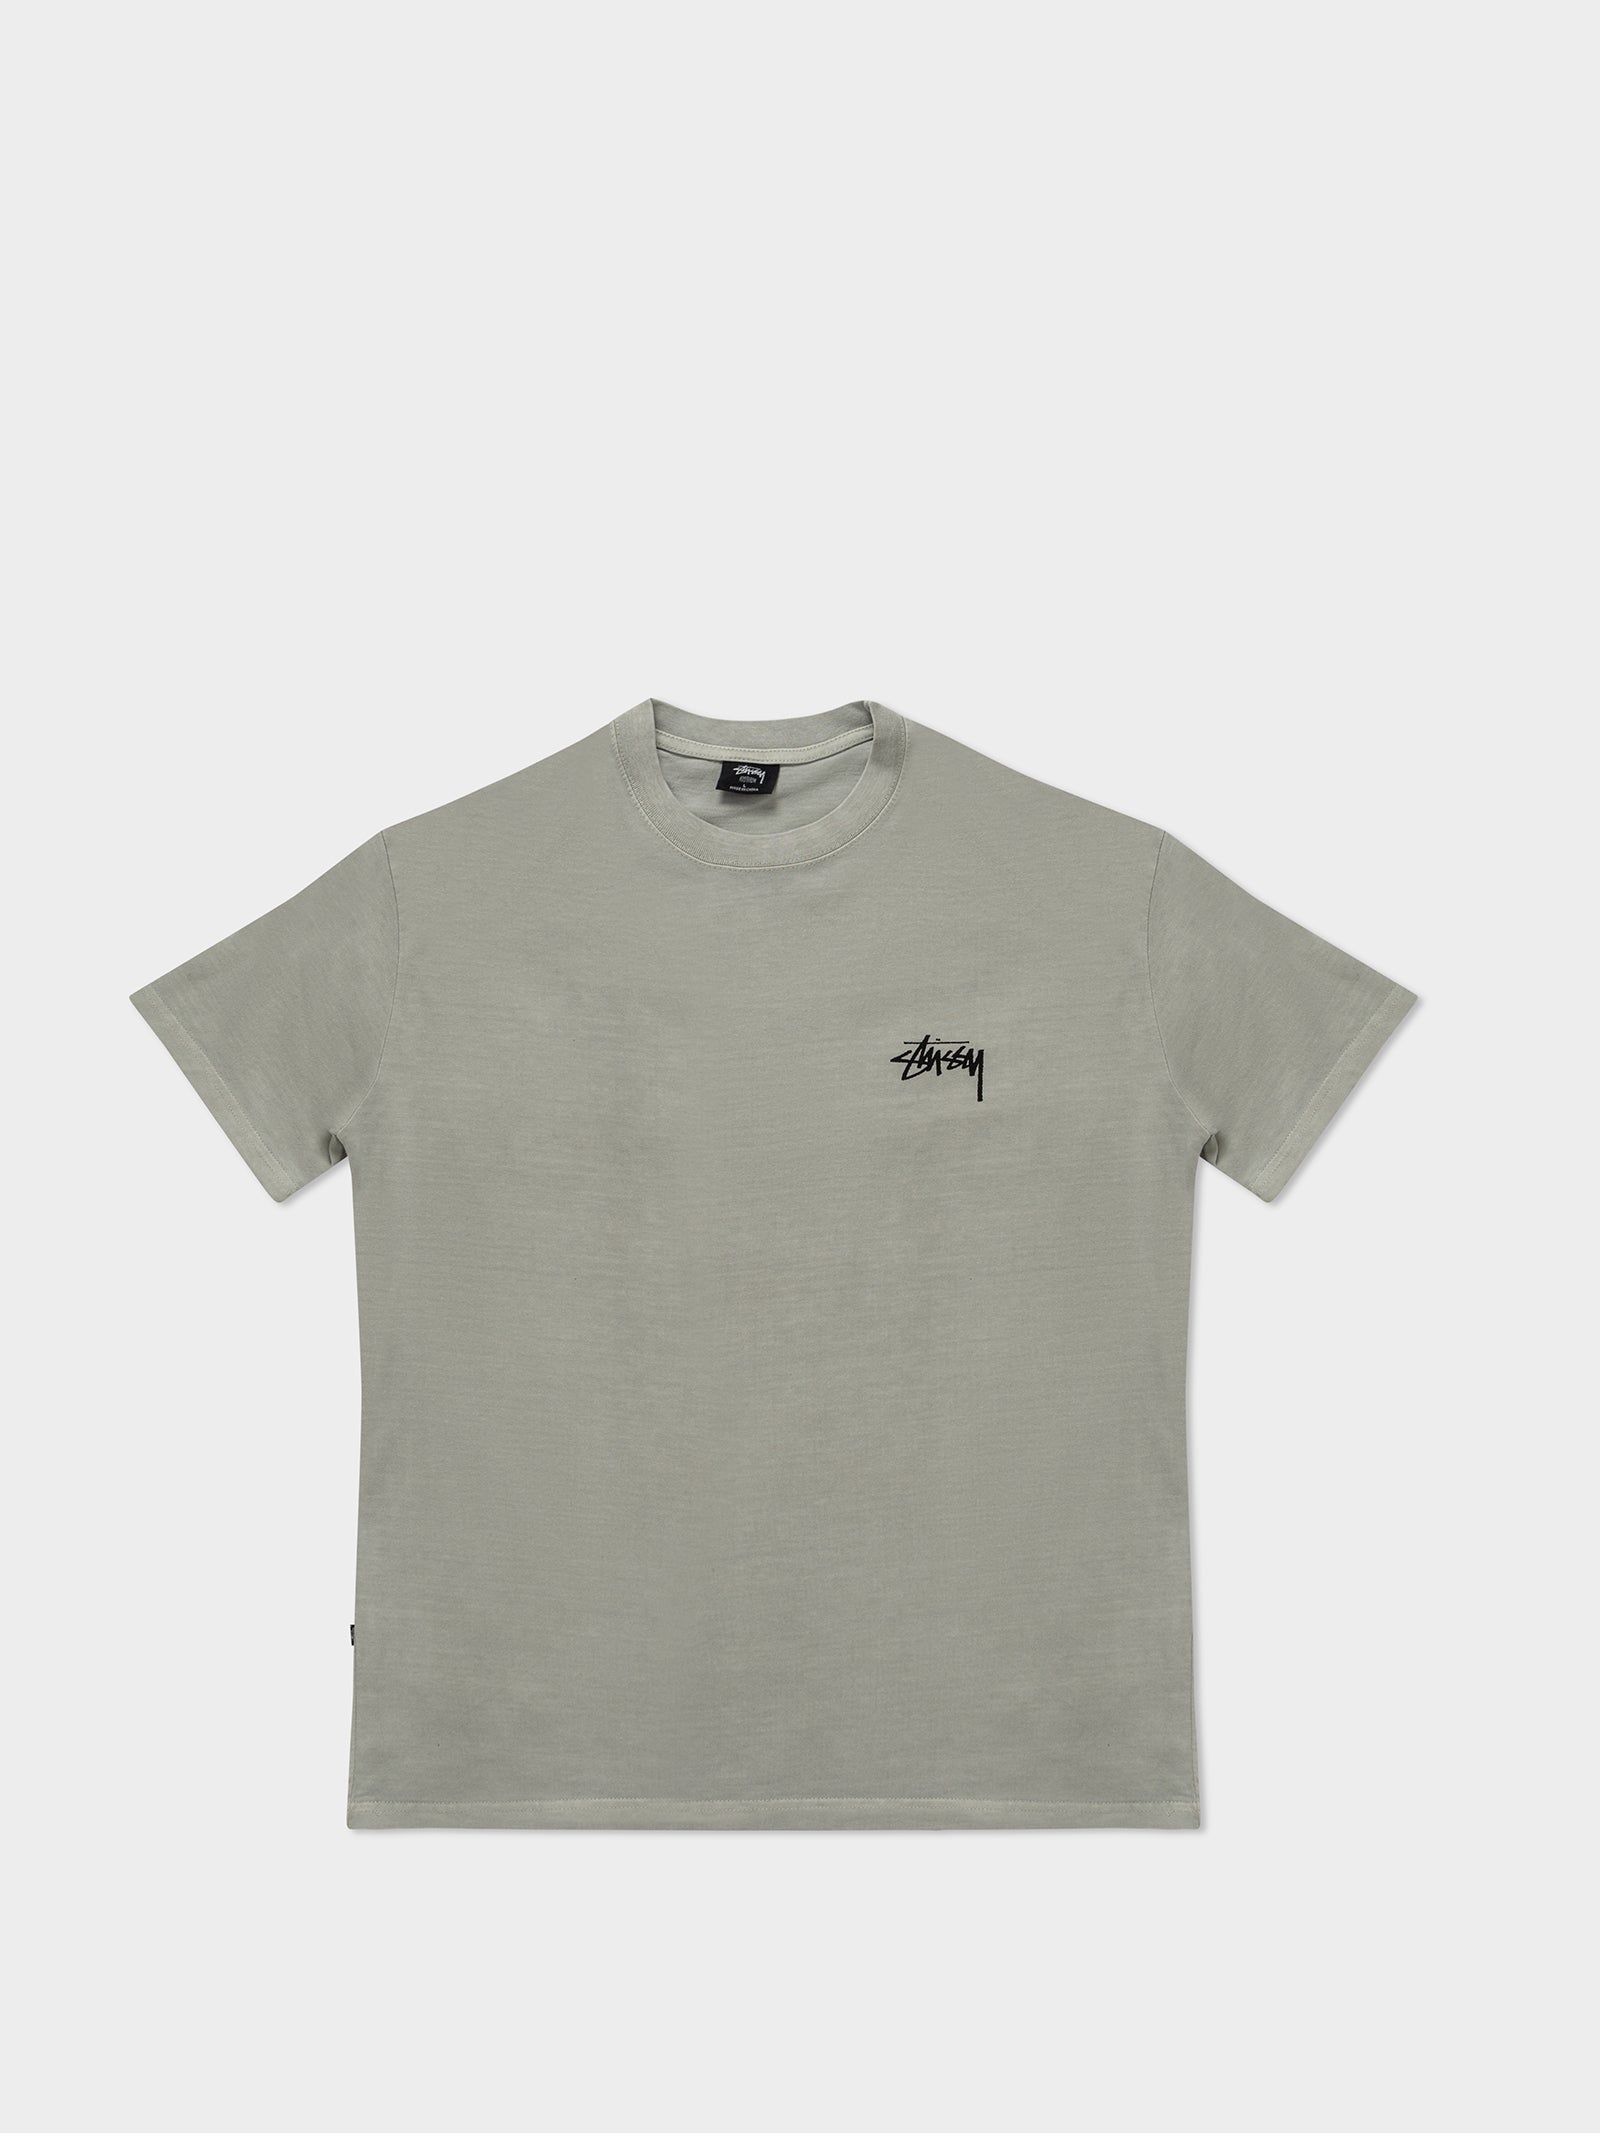 House of Cards Short Sleeve T-Shirt in Pigment Stone Grey - Glue Store